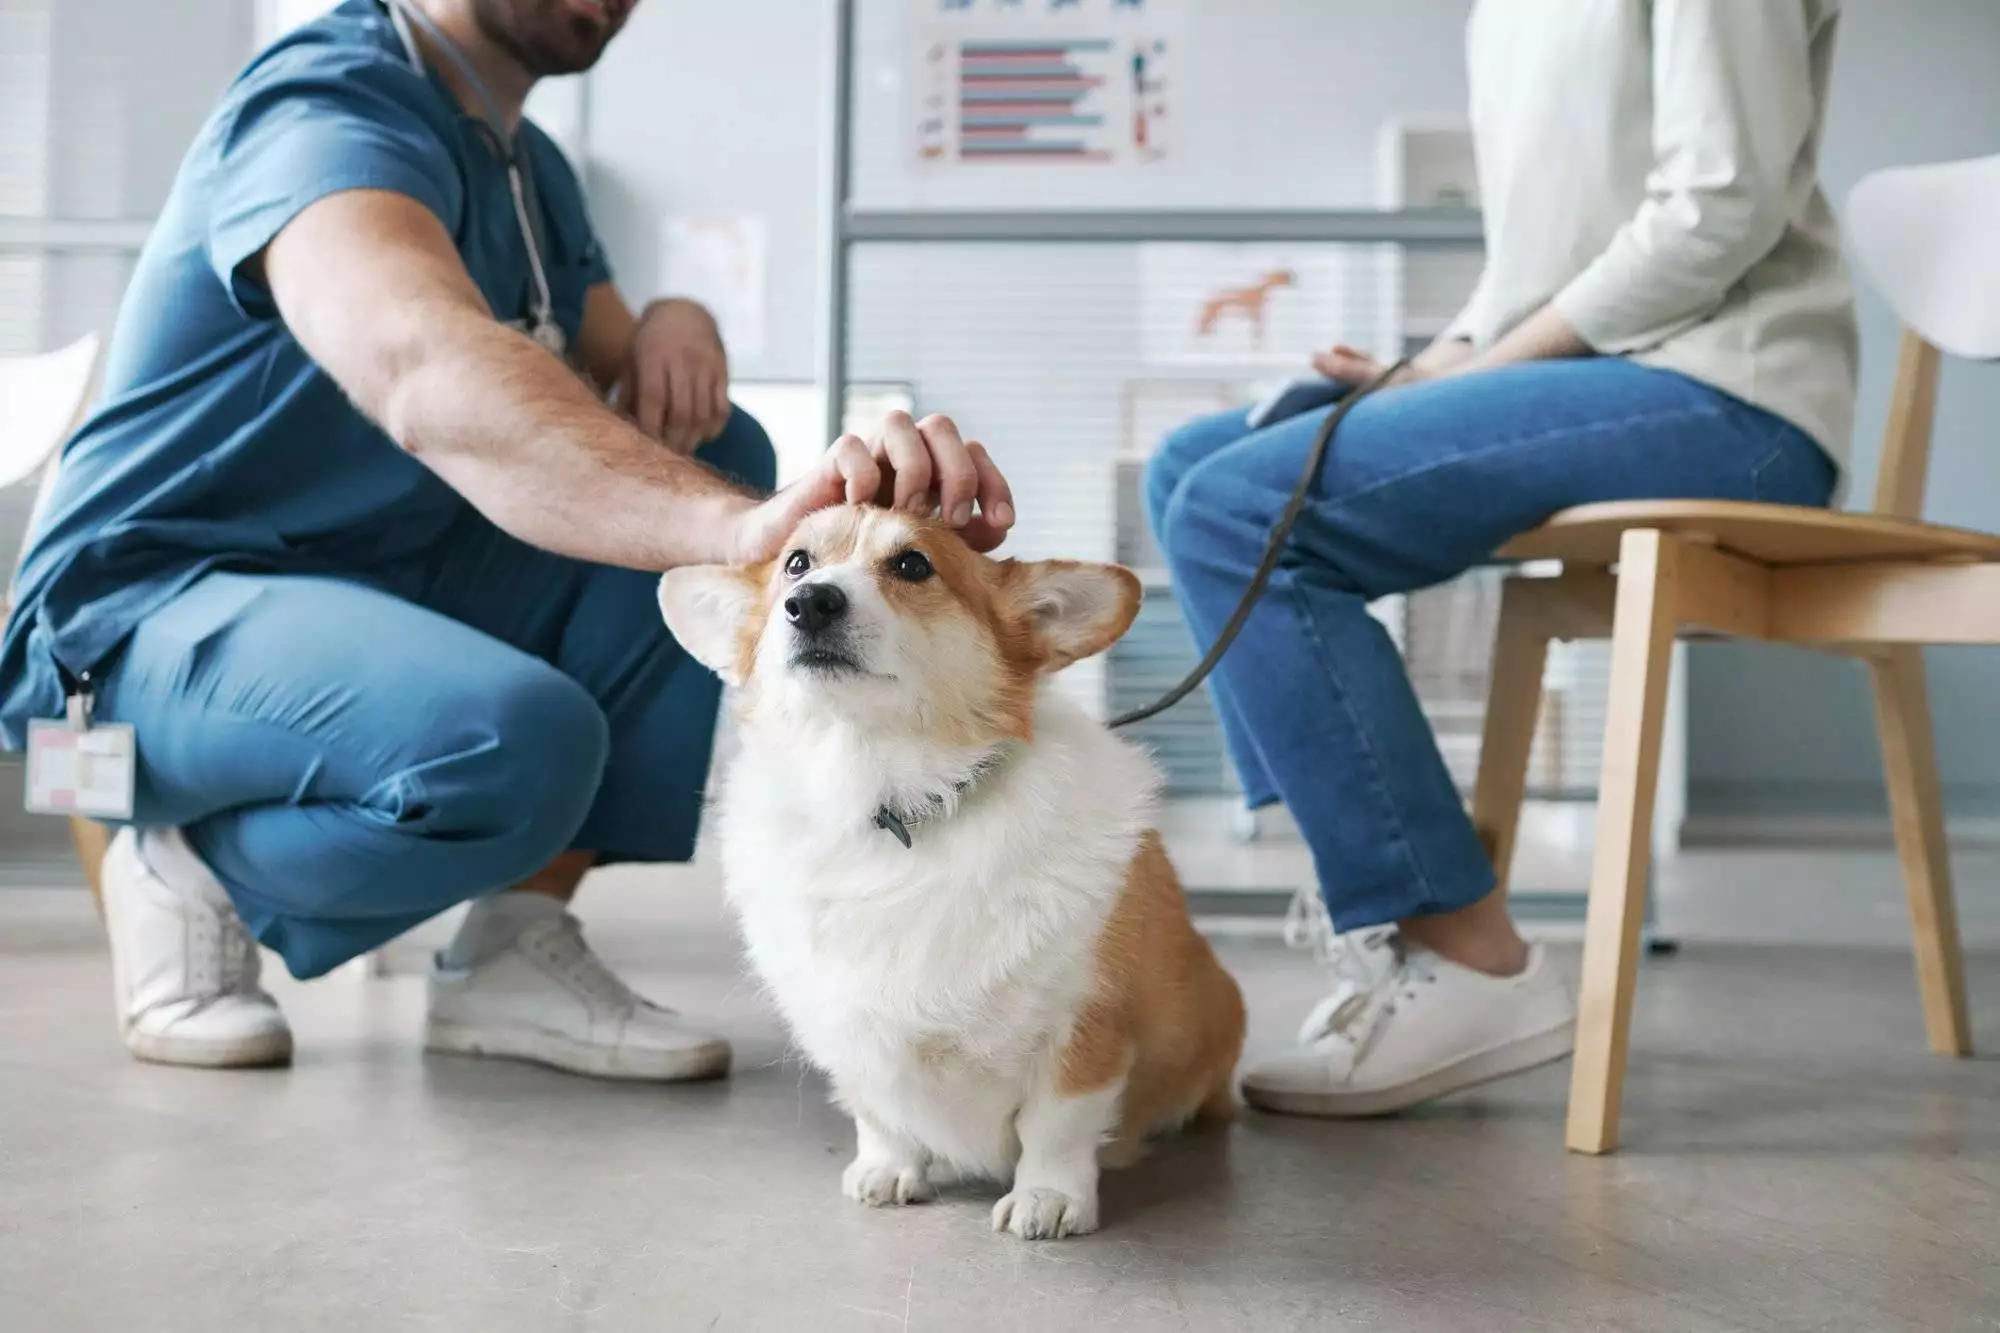 Trust This Austin Animal Hospital for the Top Pet Care